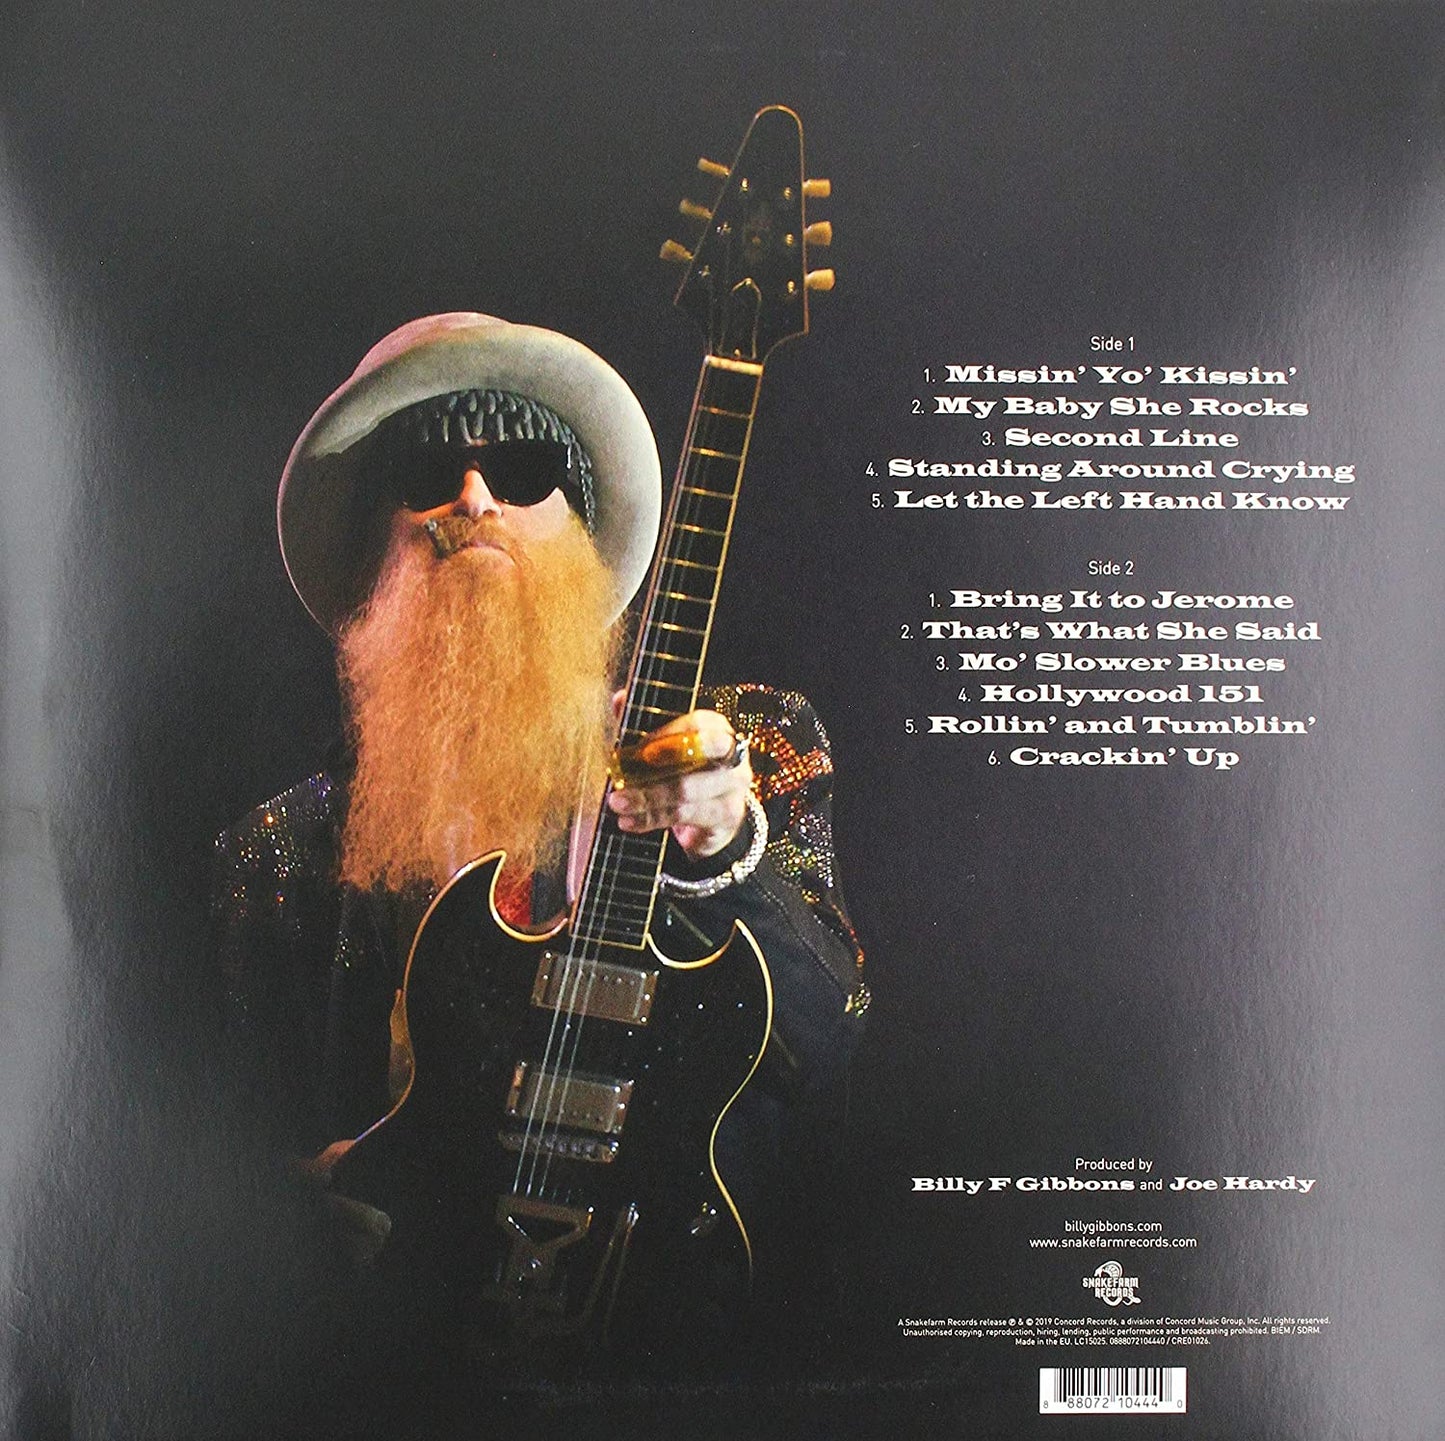 Billy Gibbons – The Big Bad Blues